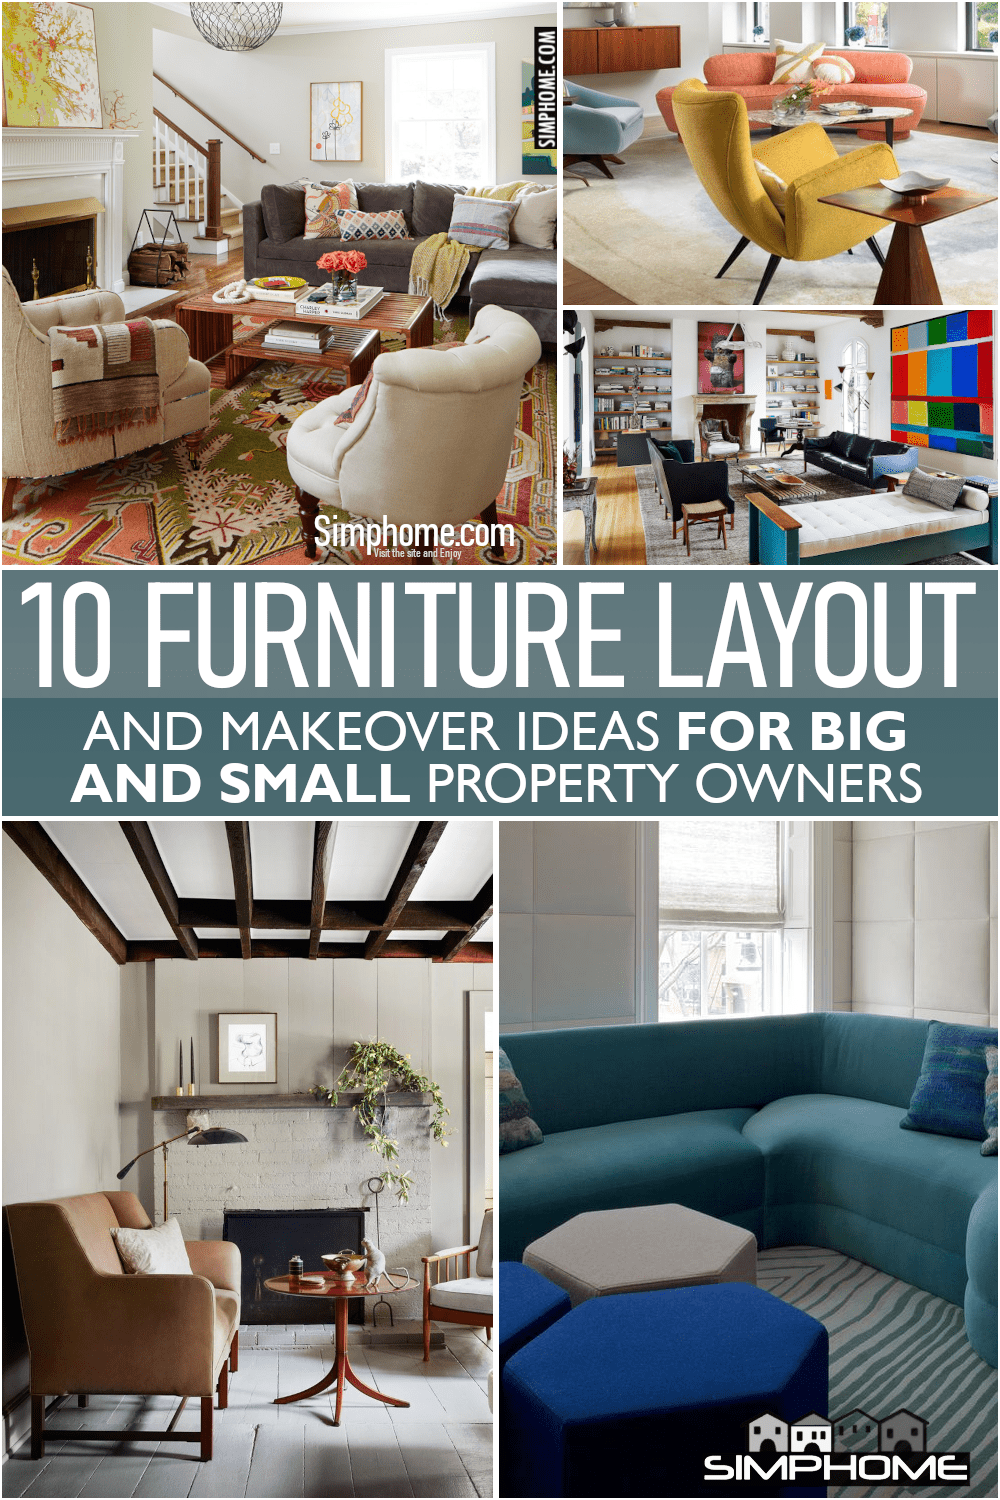 10 Furniture Layout for Big or Small Space via Simphome.comFeatured